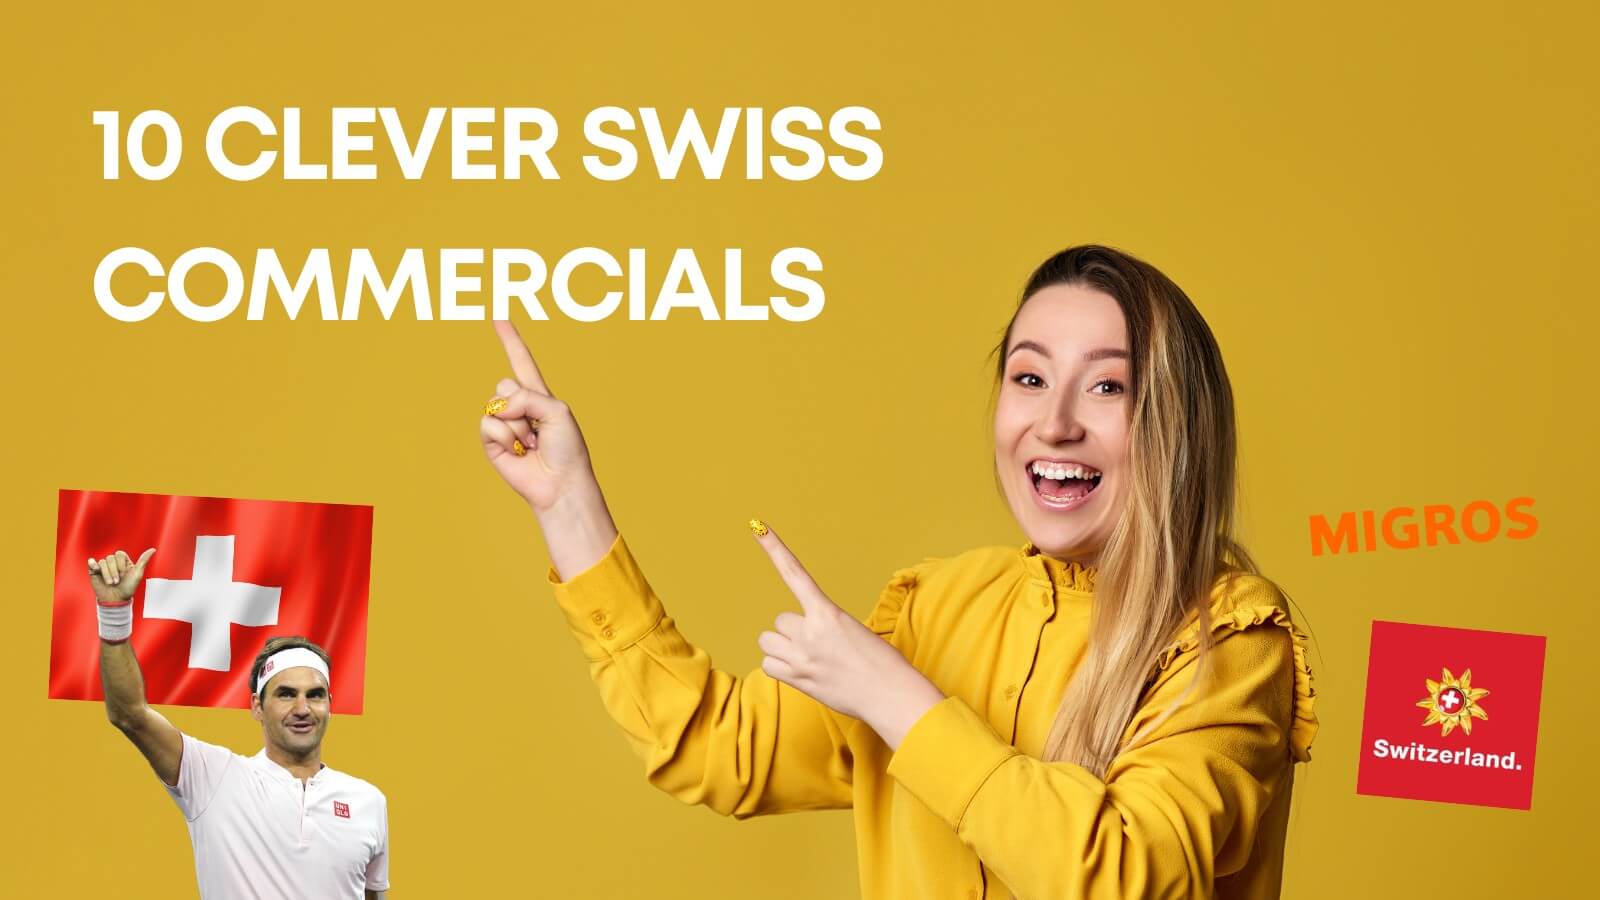 Clever Swiss Commercials - From Lindt to Migros and Roger Federer